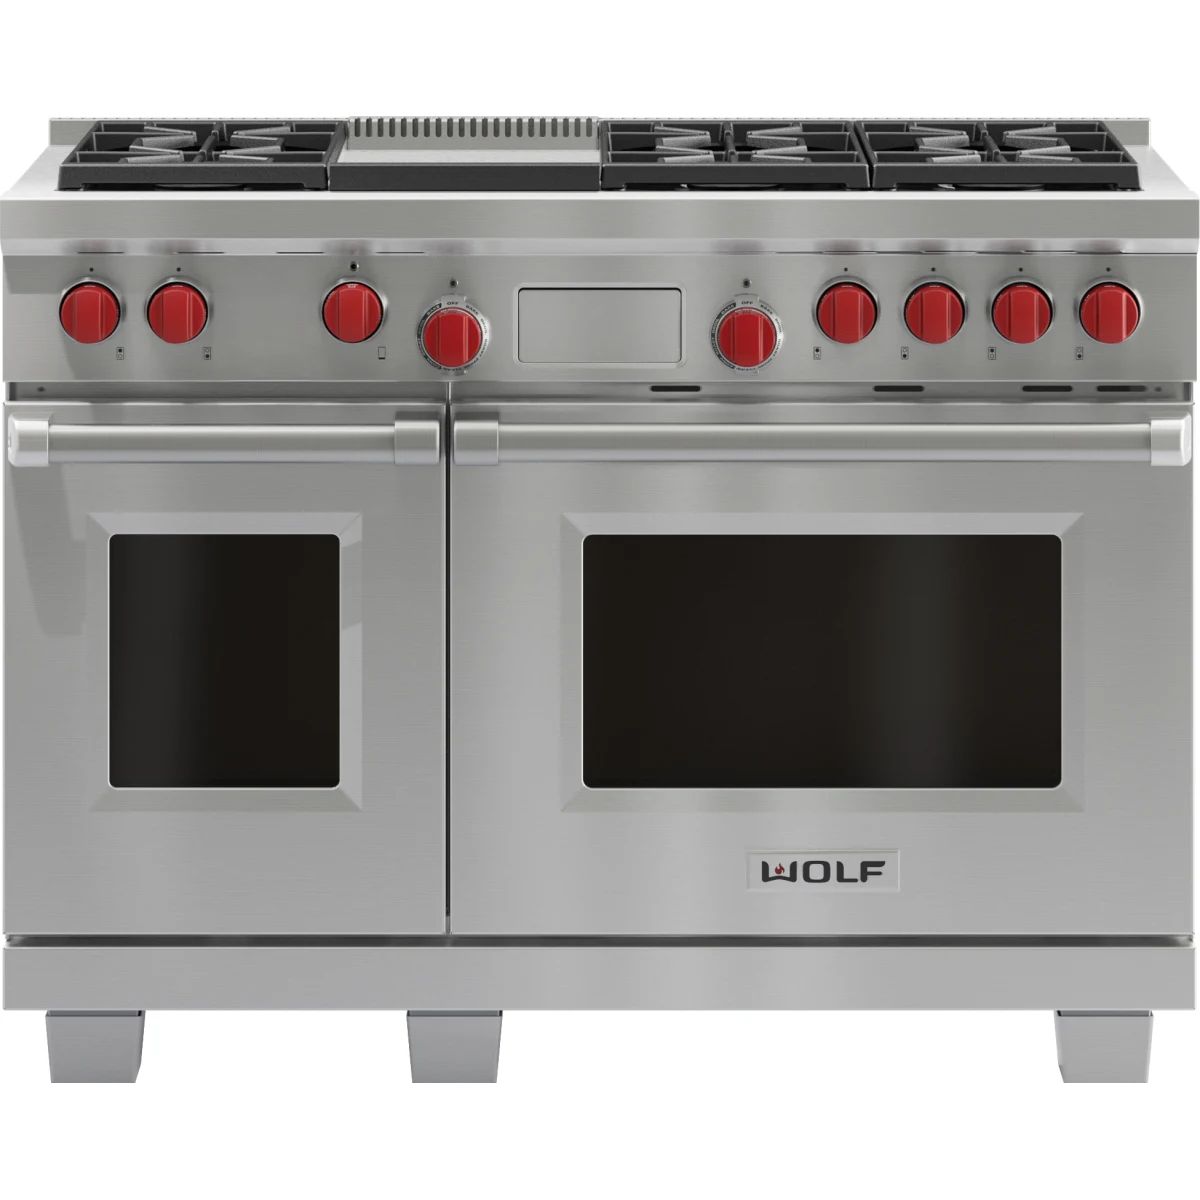 48 Inch Wide 7 Cu. Ft. Free Standing Dual Fuel Range with Infrared Griddle | Build.com, Inc.